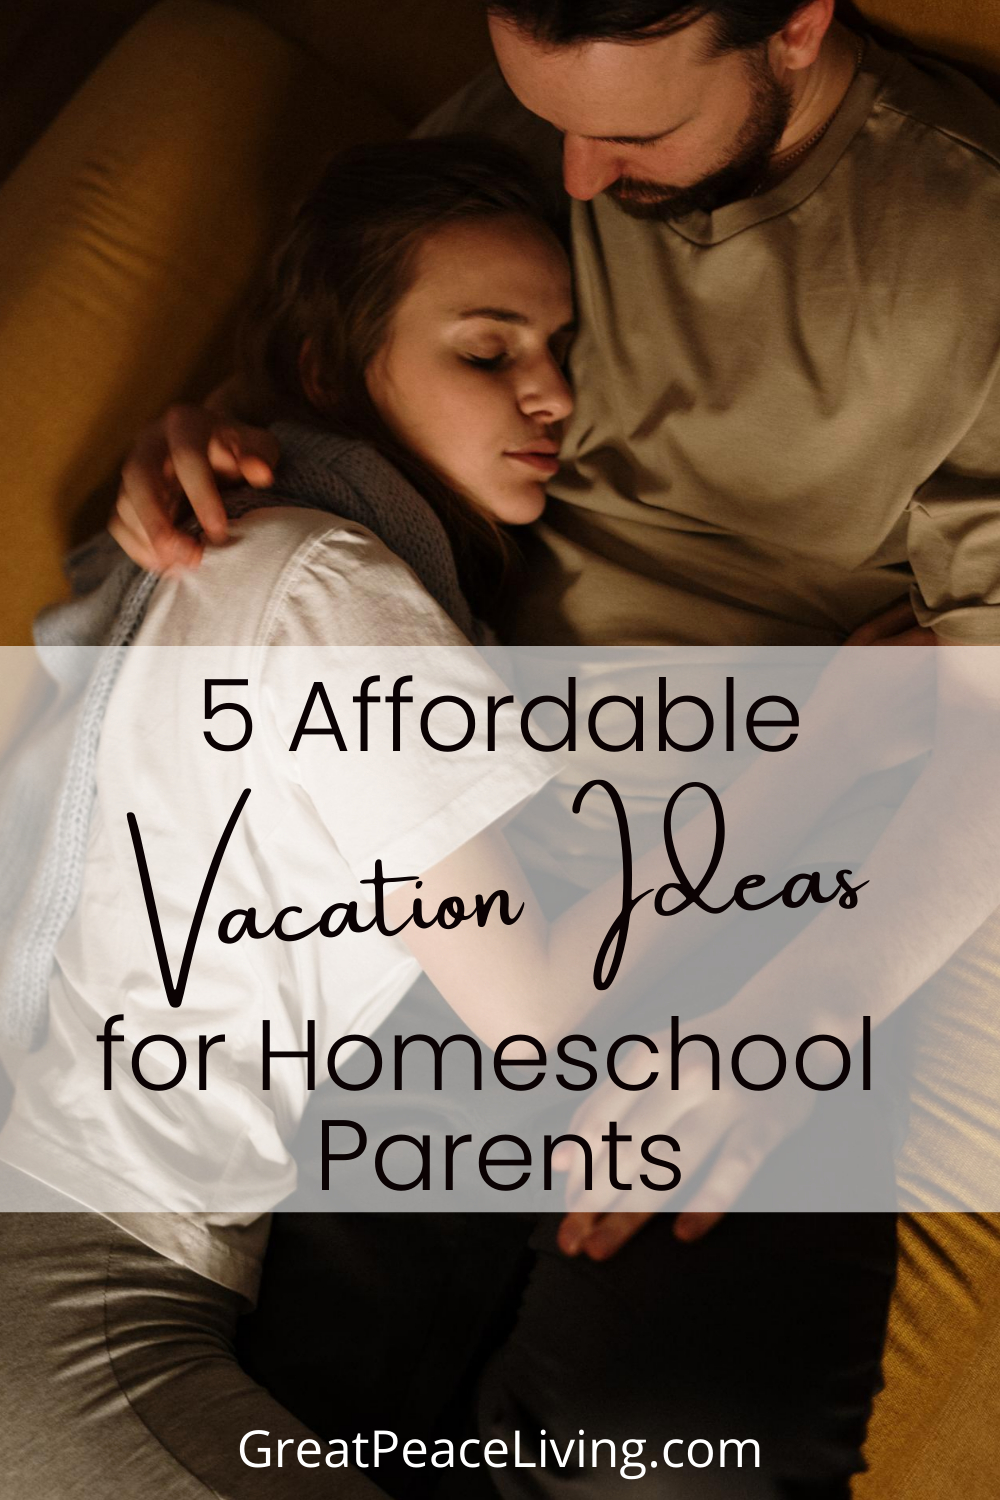 Homeschool Parents Need Vacation Time